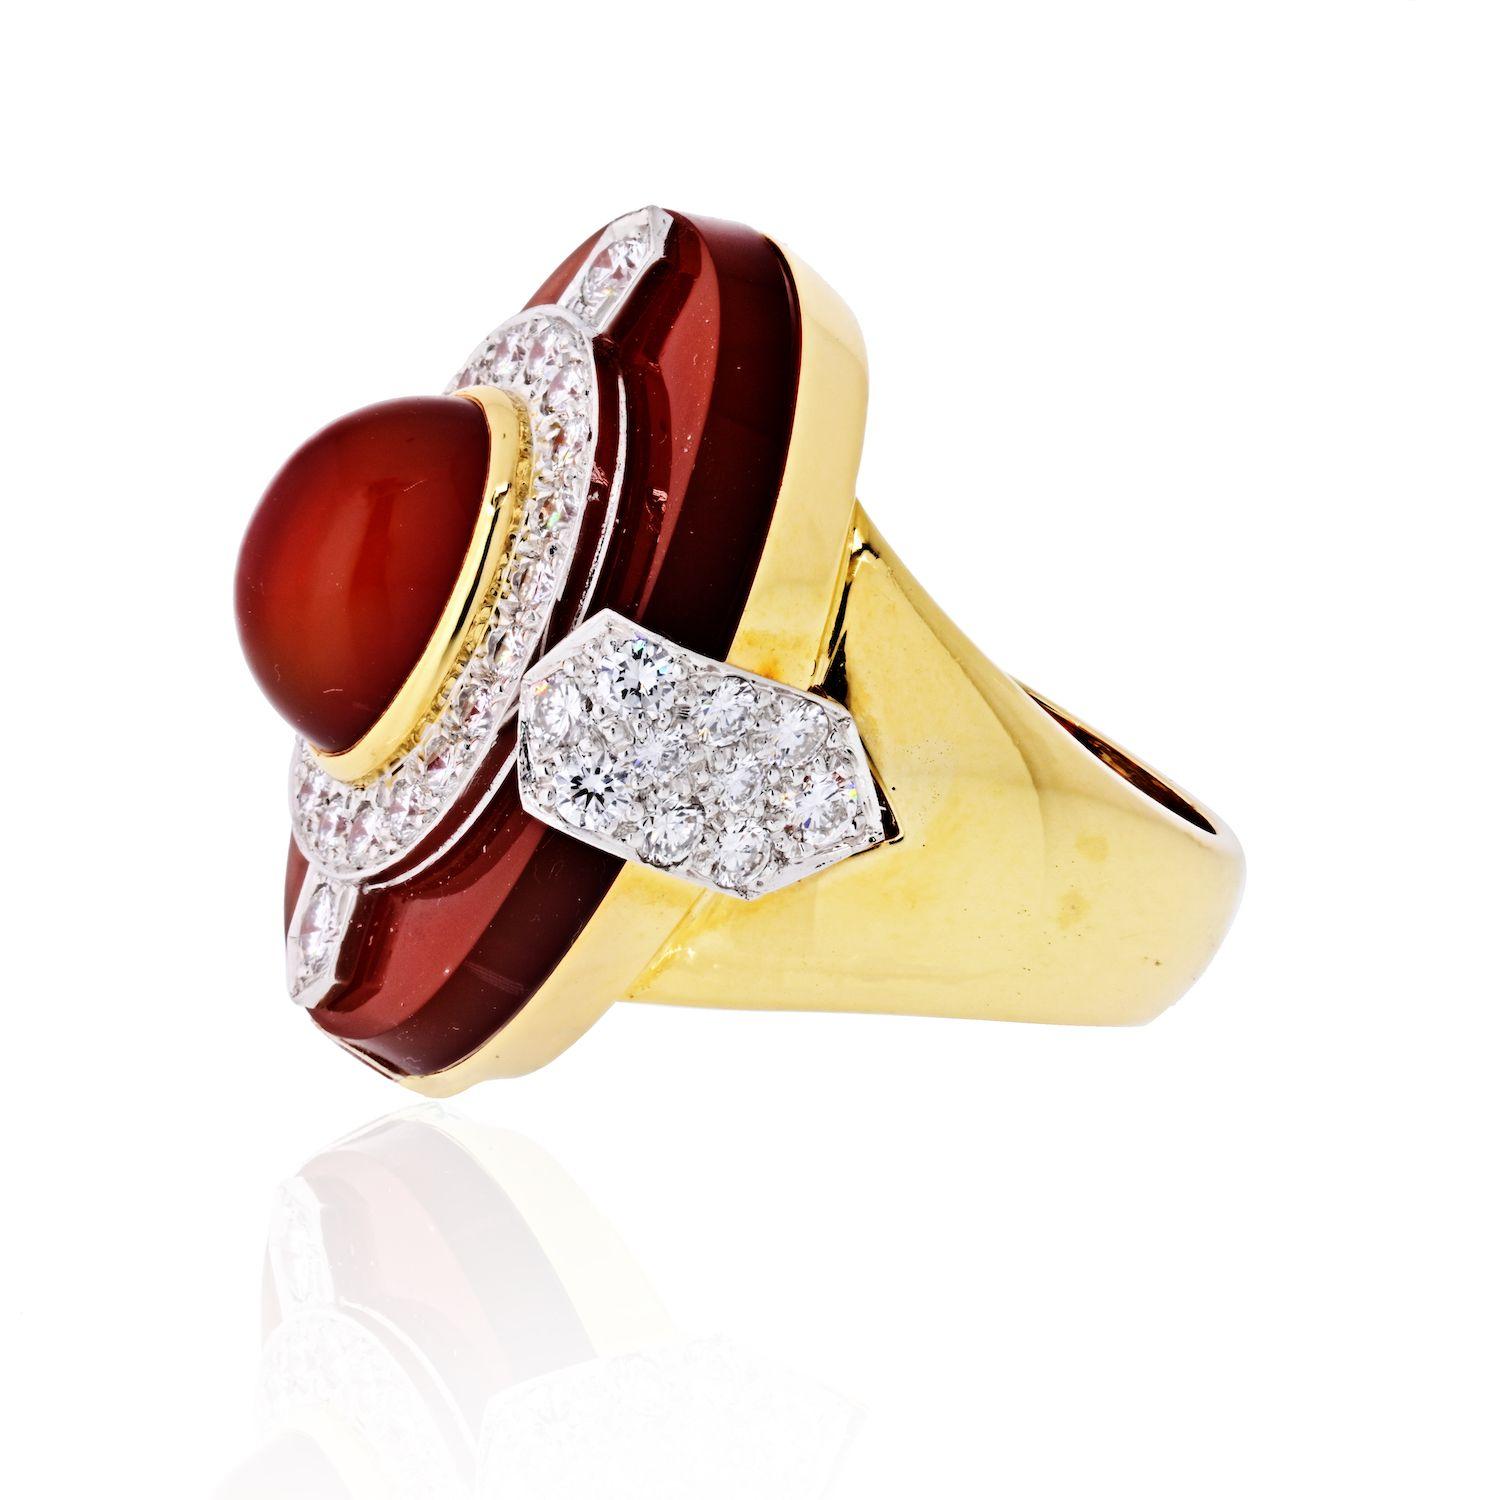 David Webb Streamline Carnelian & Diamond Cocktail Ring in 18k Yellow Gold.
Carved and cabochon carnelian, brilliant-cut diamonds, 18K yellow gold, and platinum. 

Size 6.
